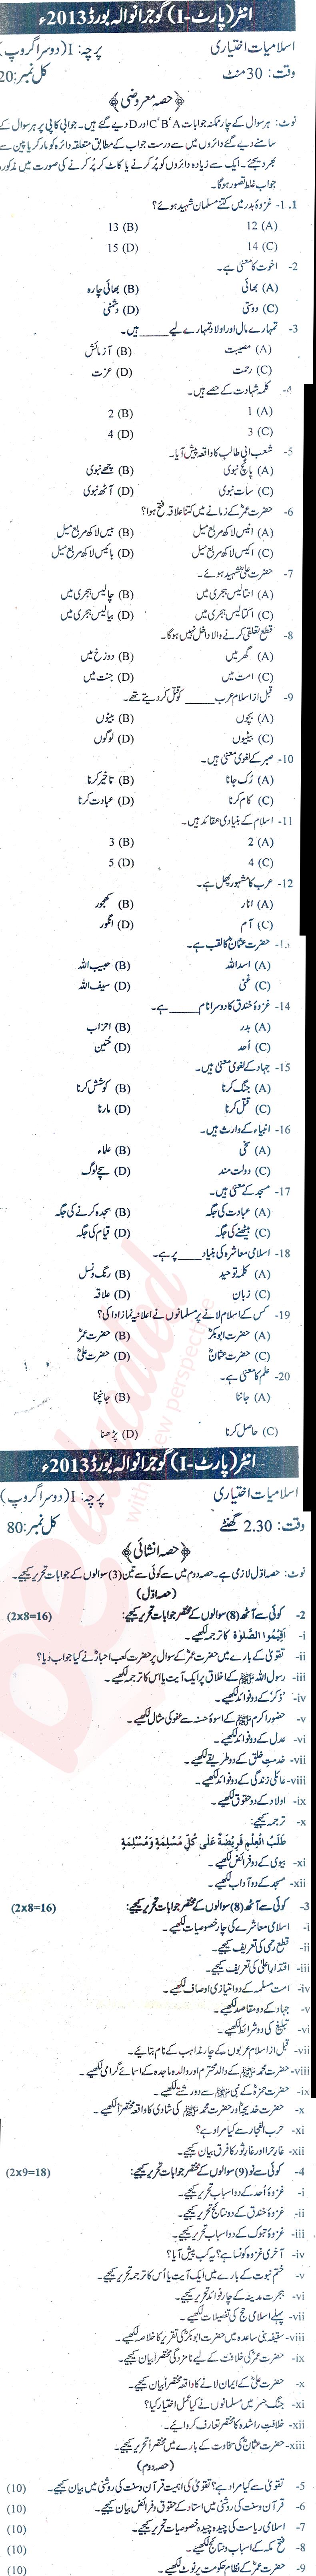 Islamiat Elective FA Part 1 Past Paper Group 2 BISE Gujranwala 2013